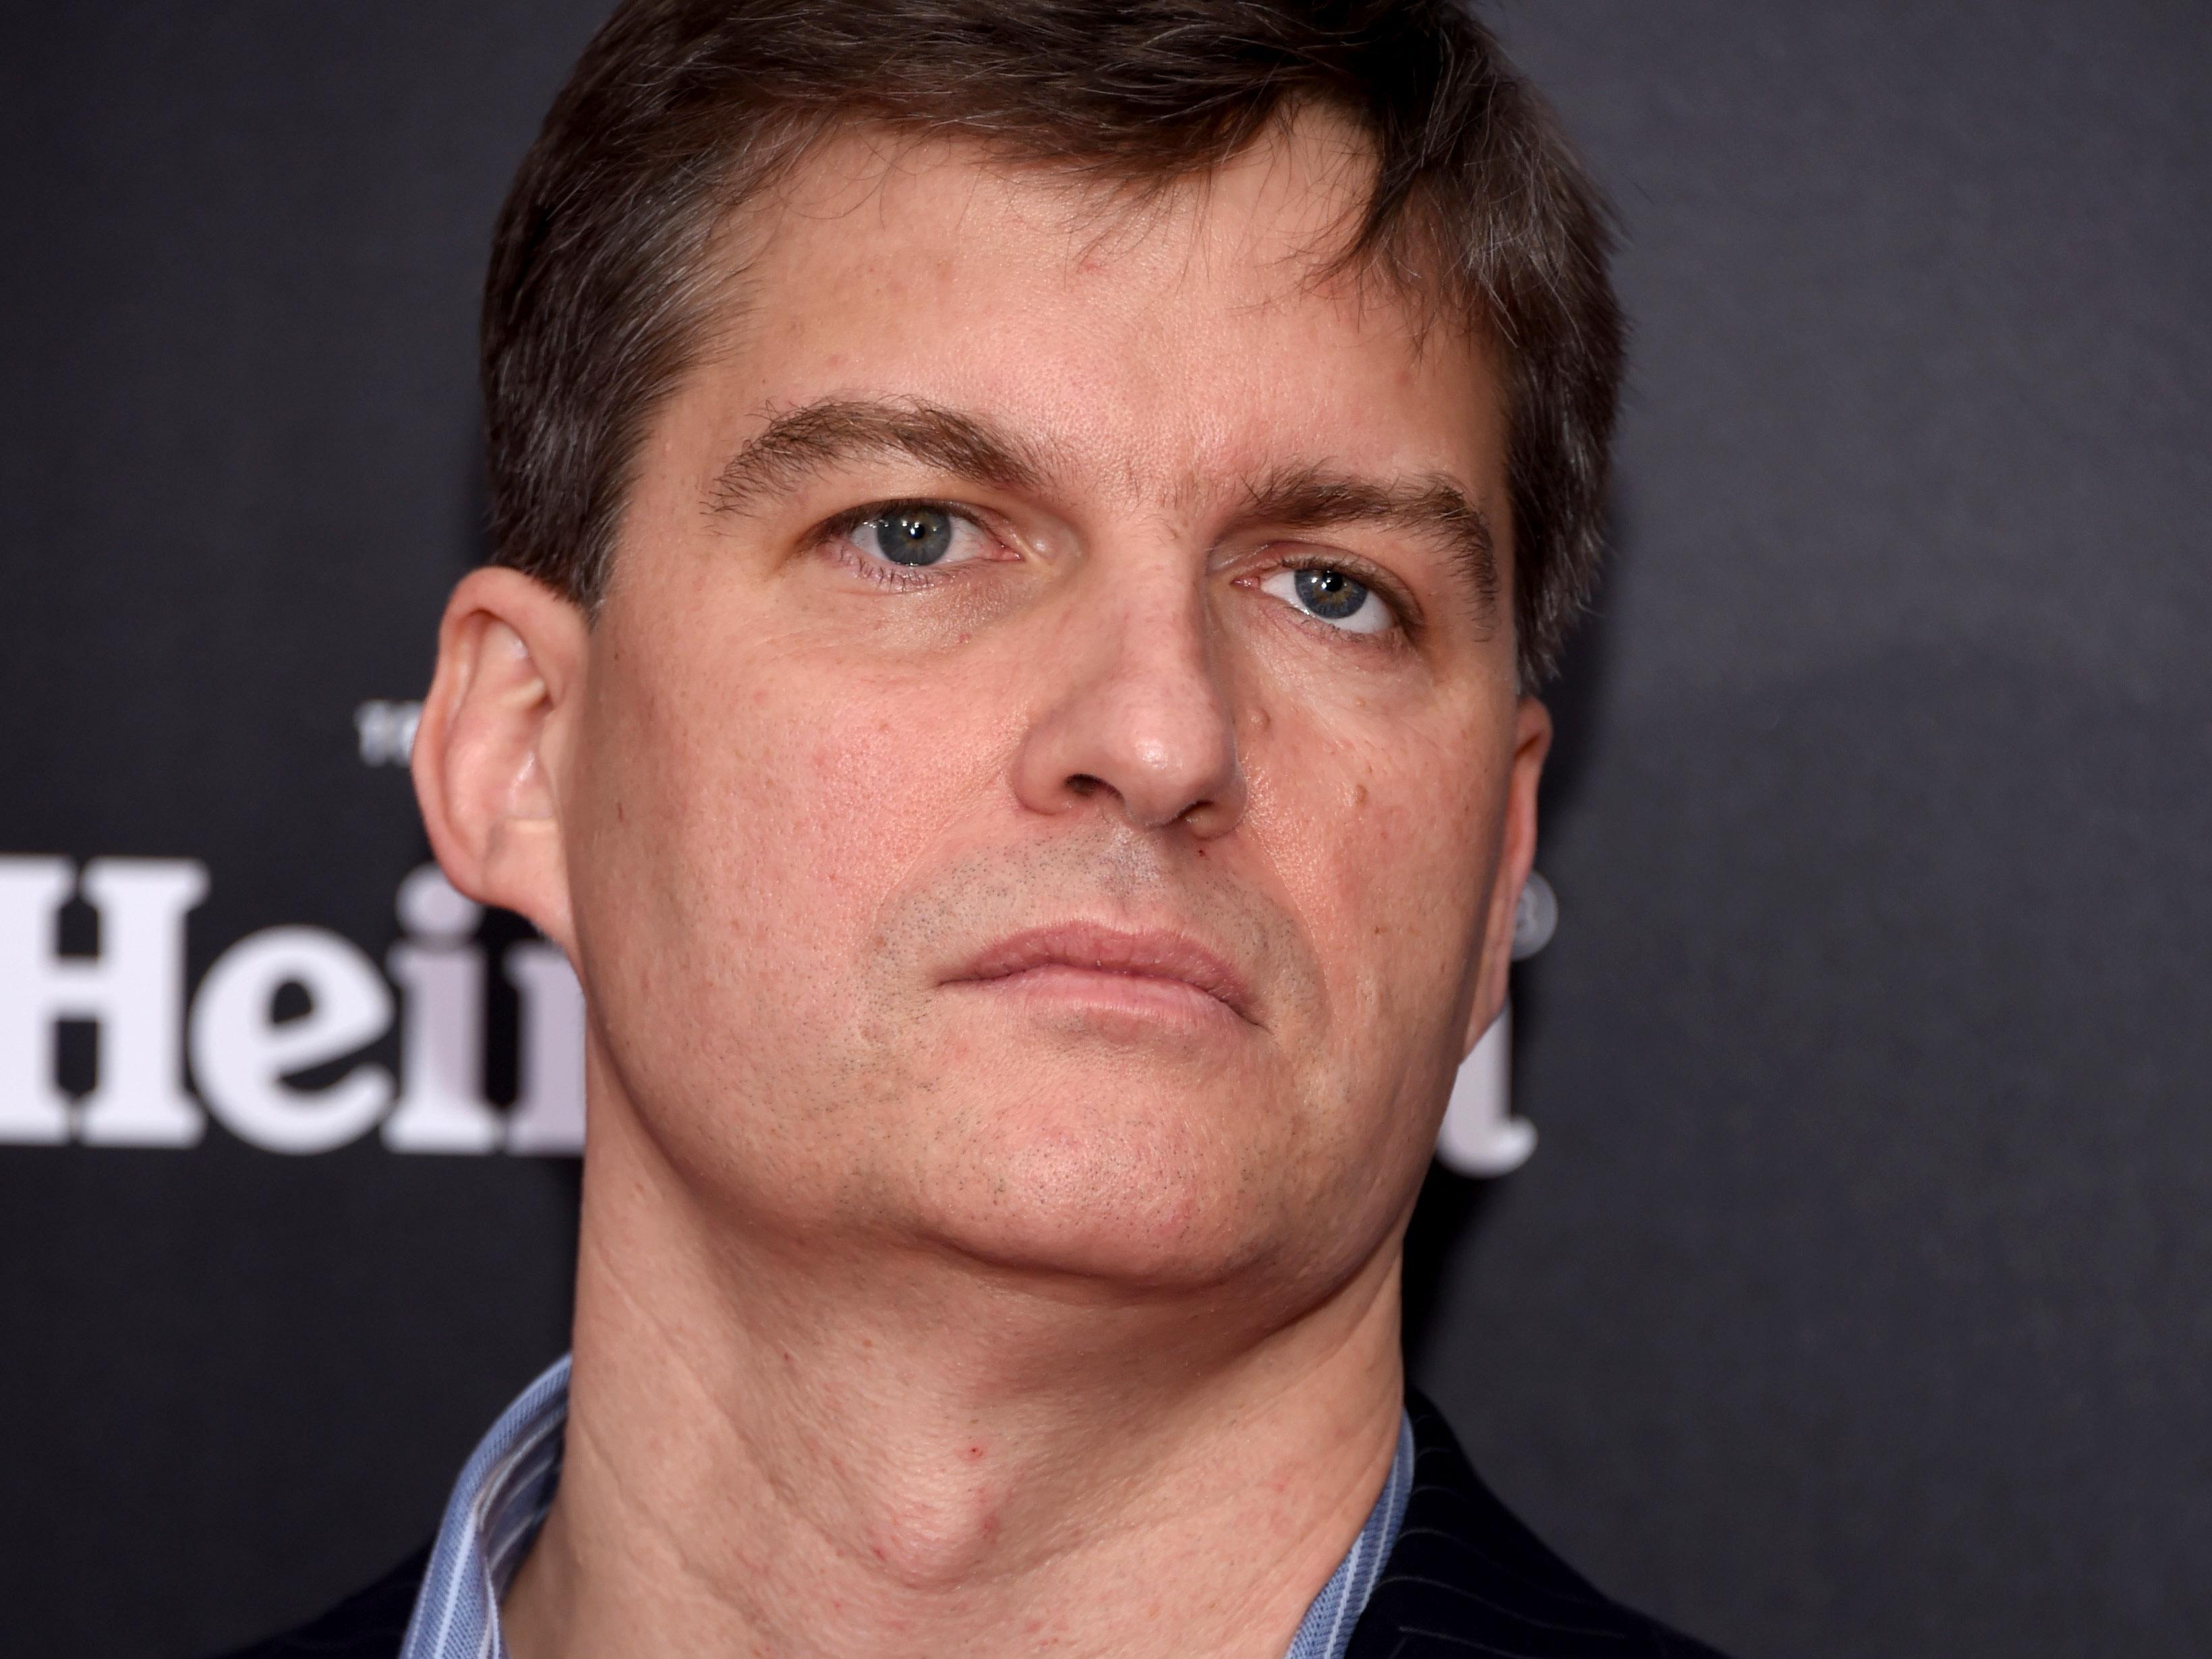 Big Short’s Michael Burry Tweets About Inflation, SEC, Fed and Market